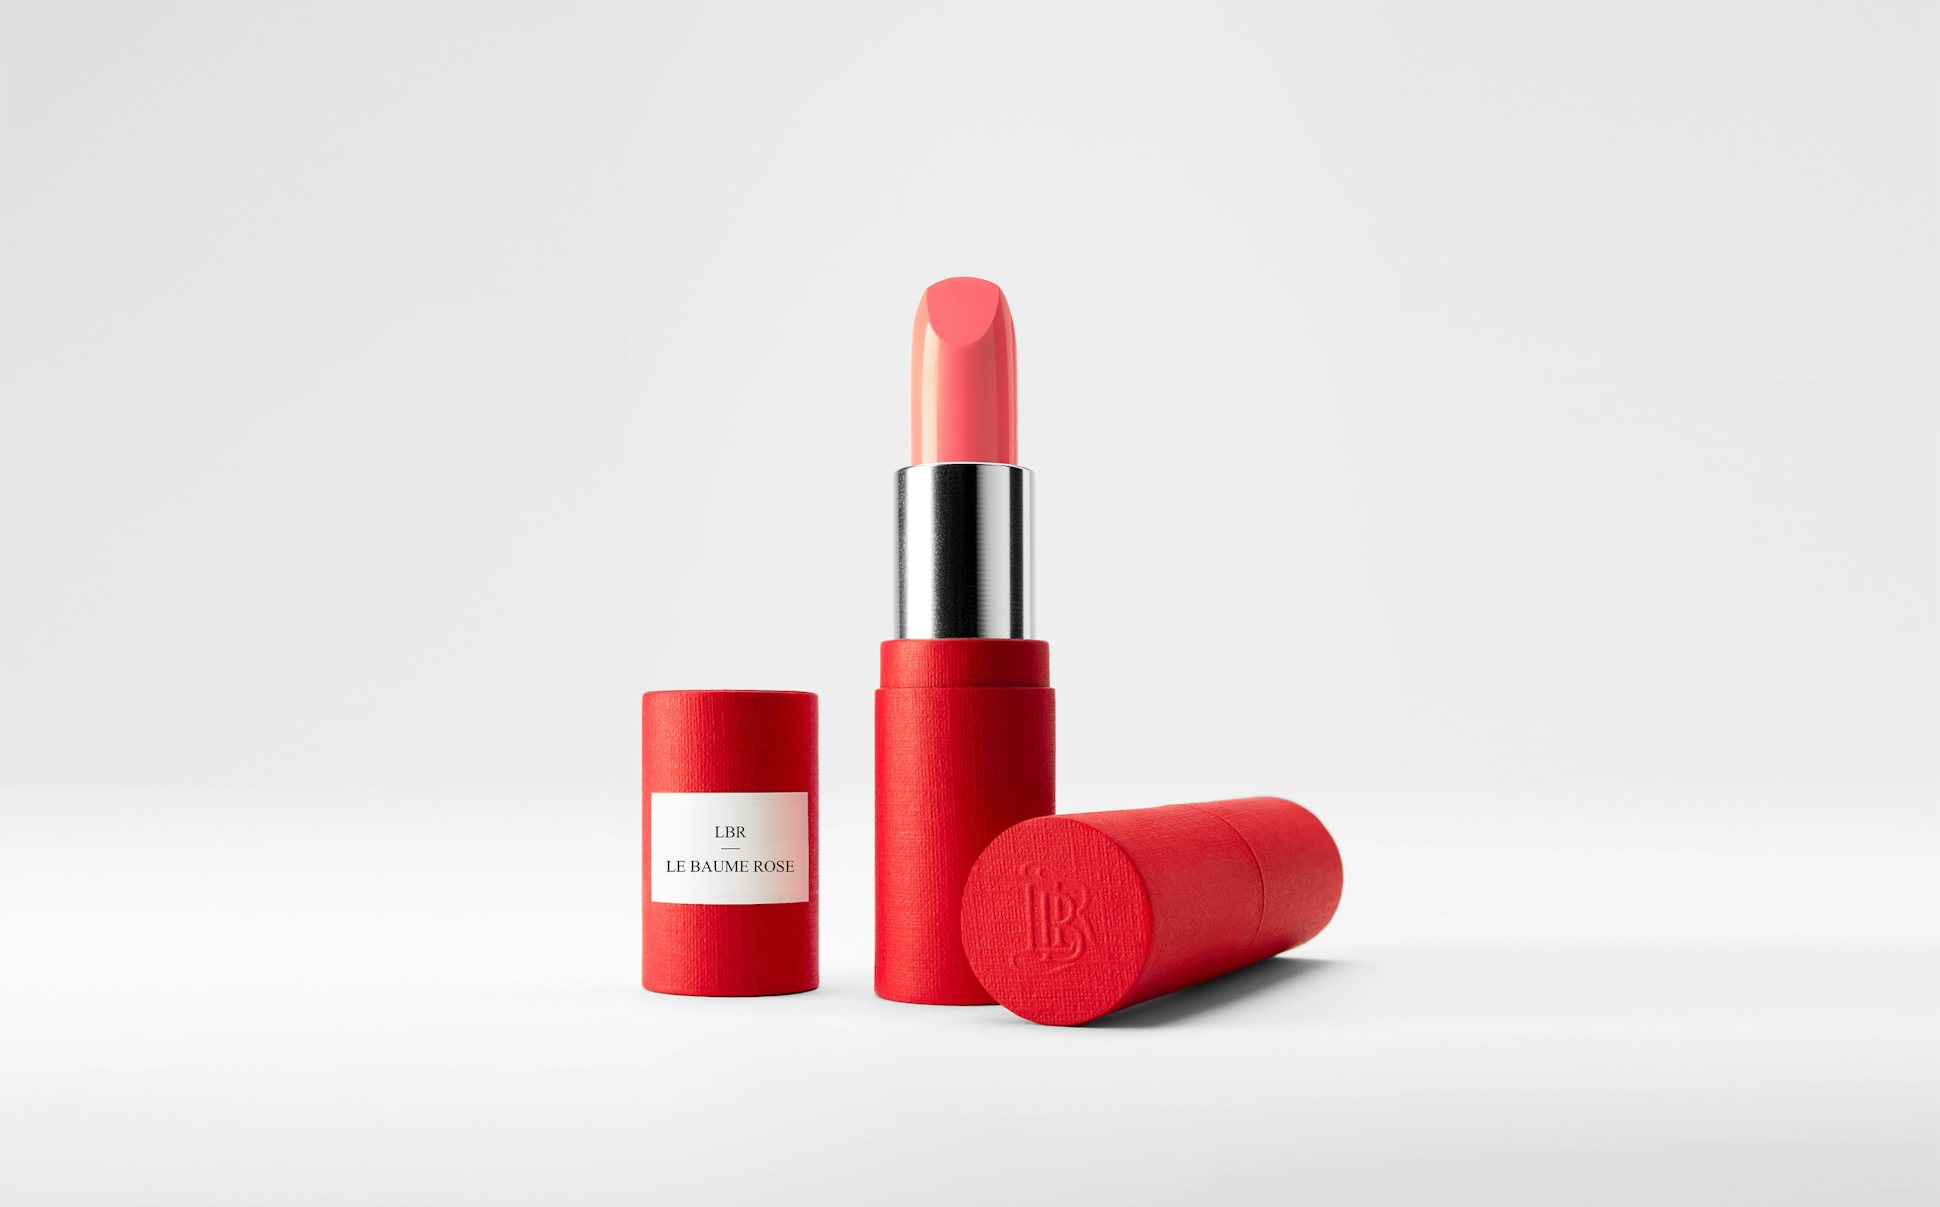 La bouche rouge Pink balm lipstick in the red paper case